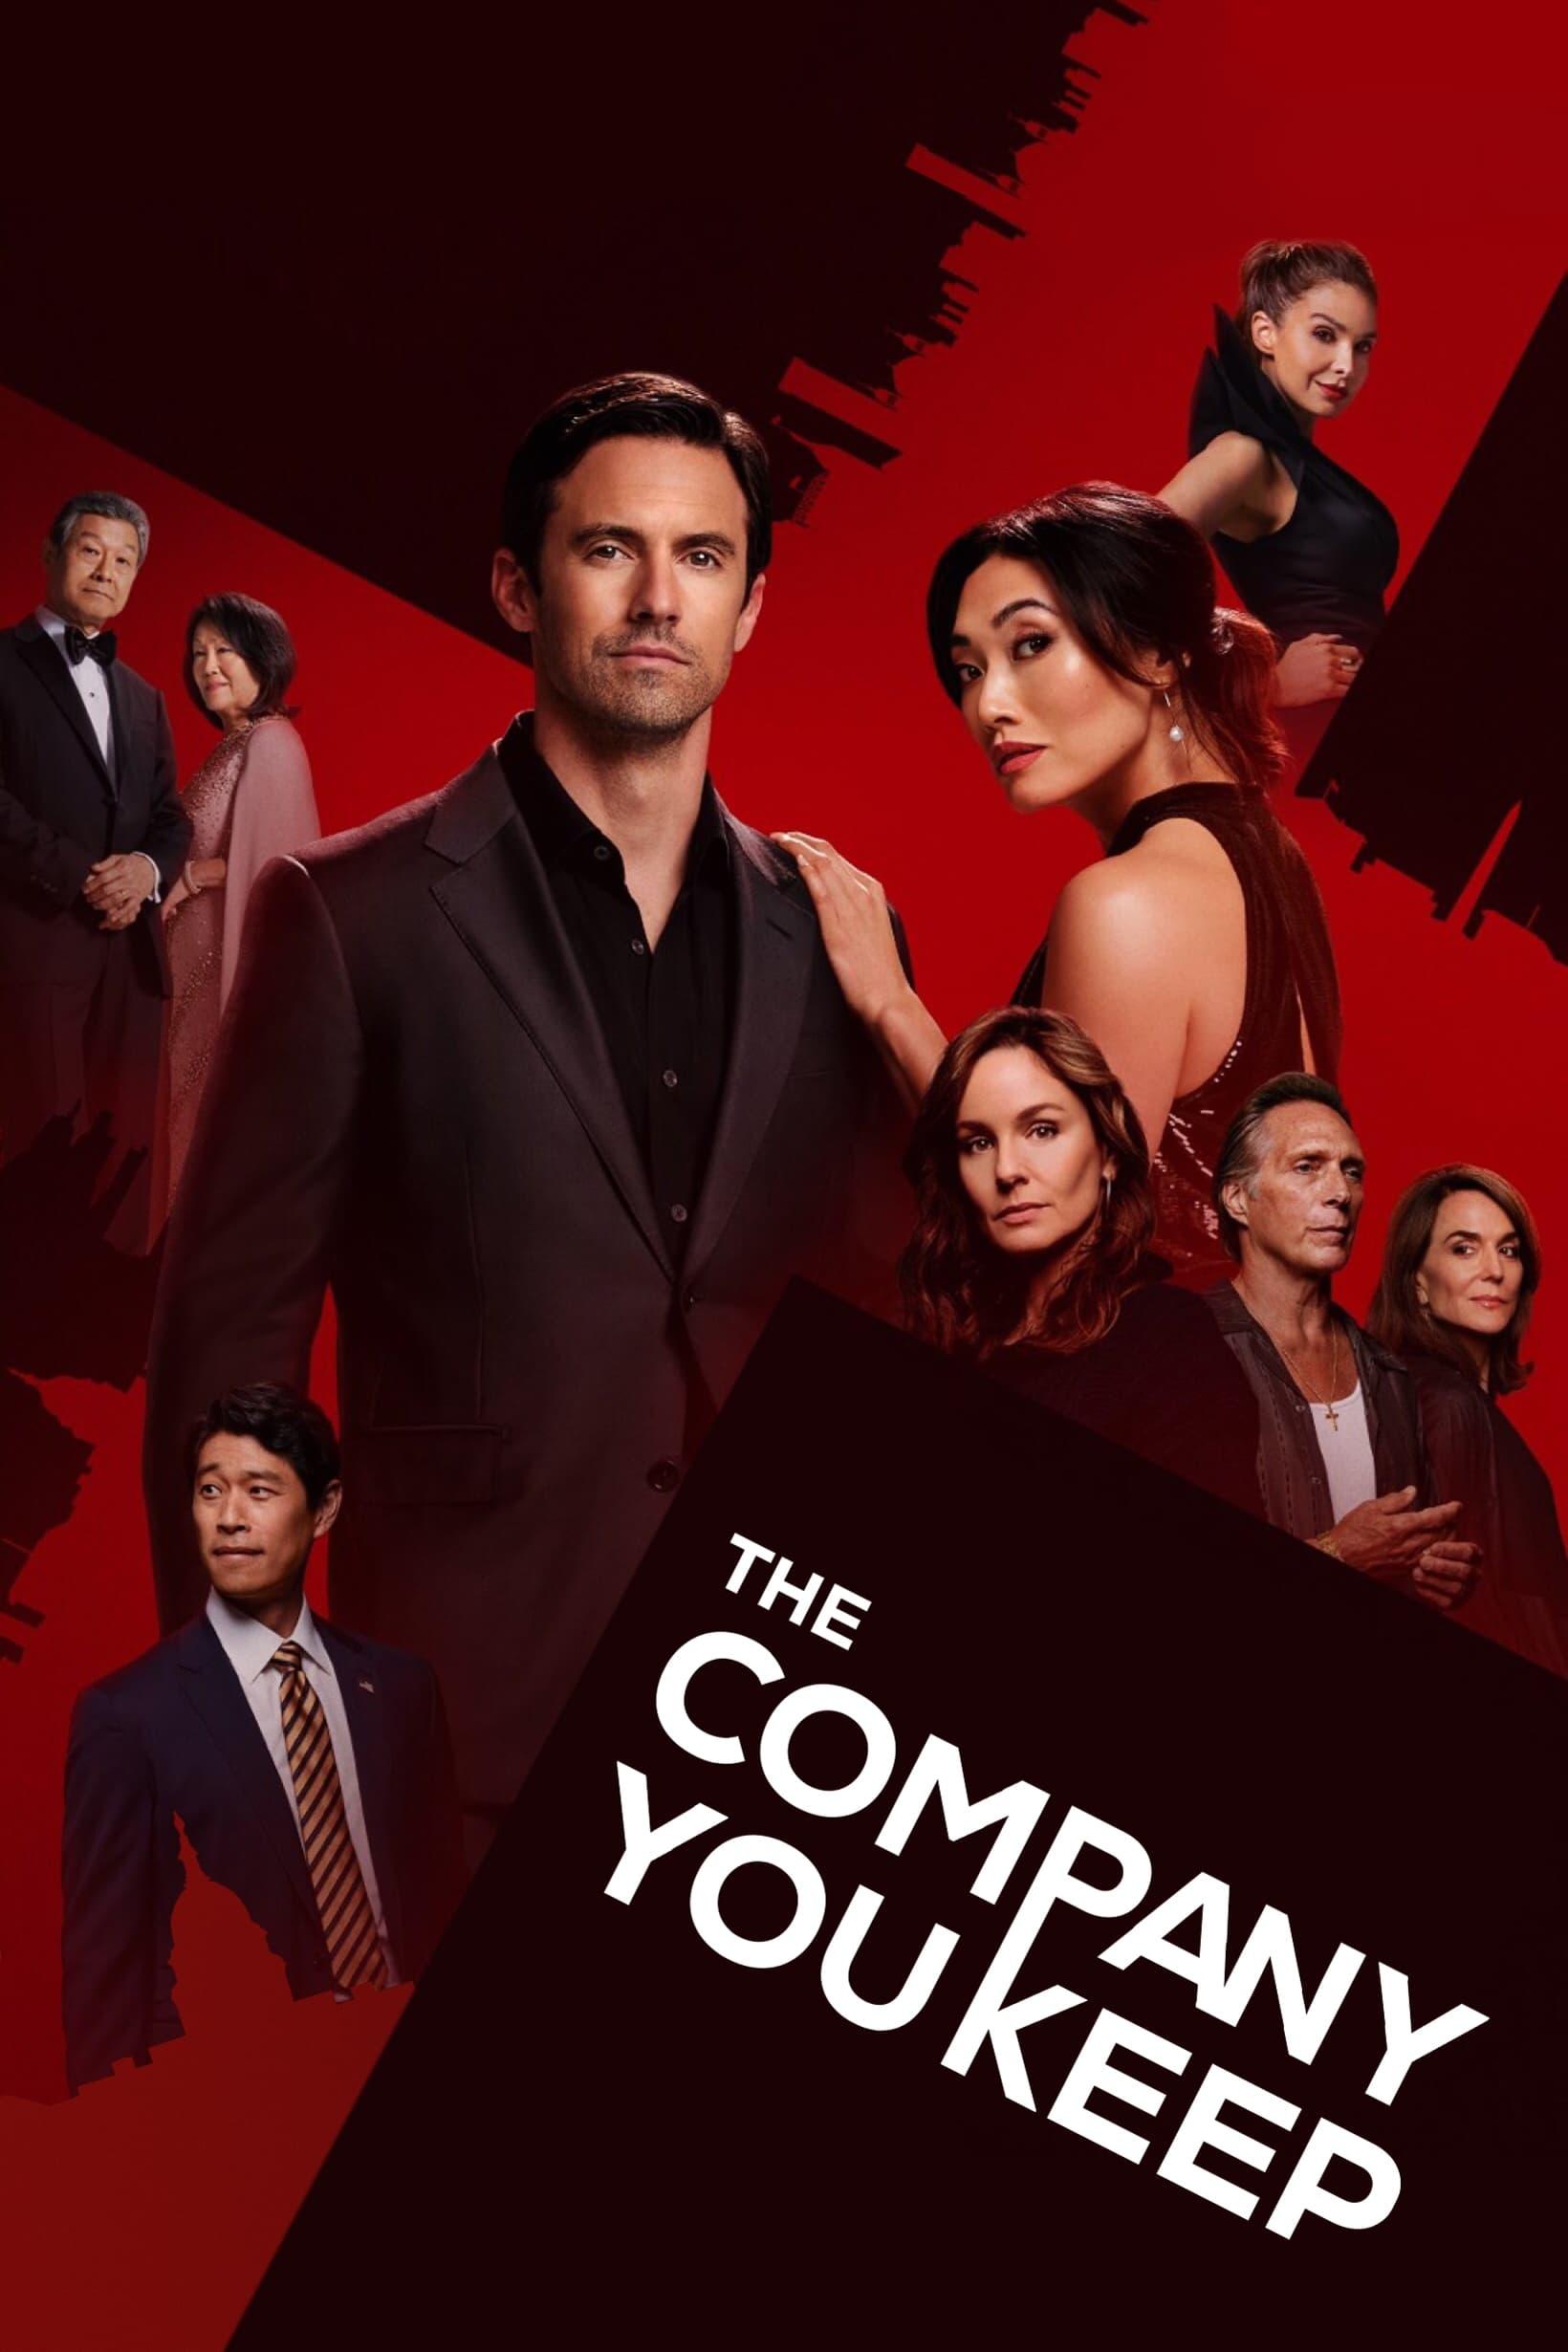 The Company You Keep poster